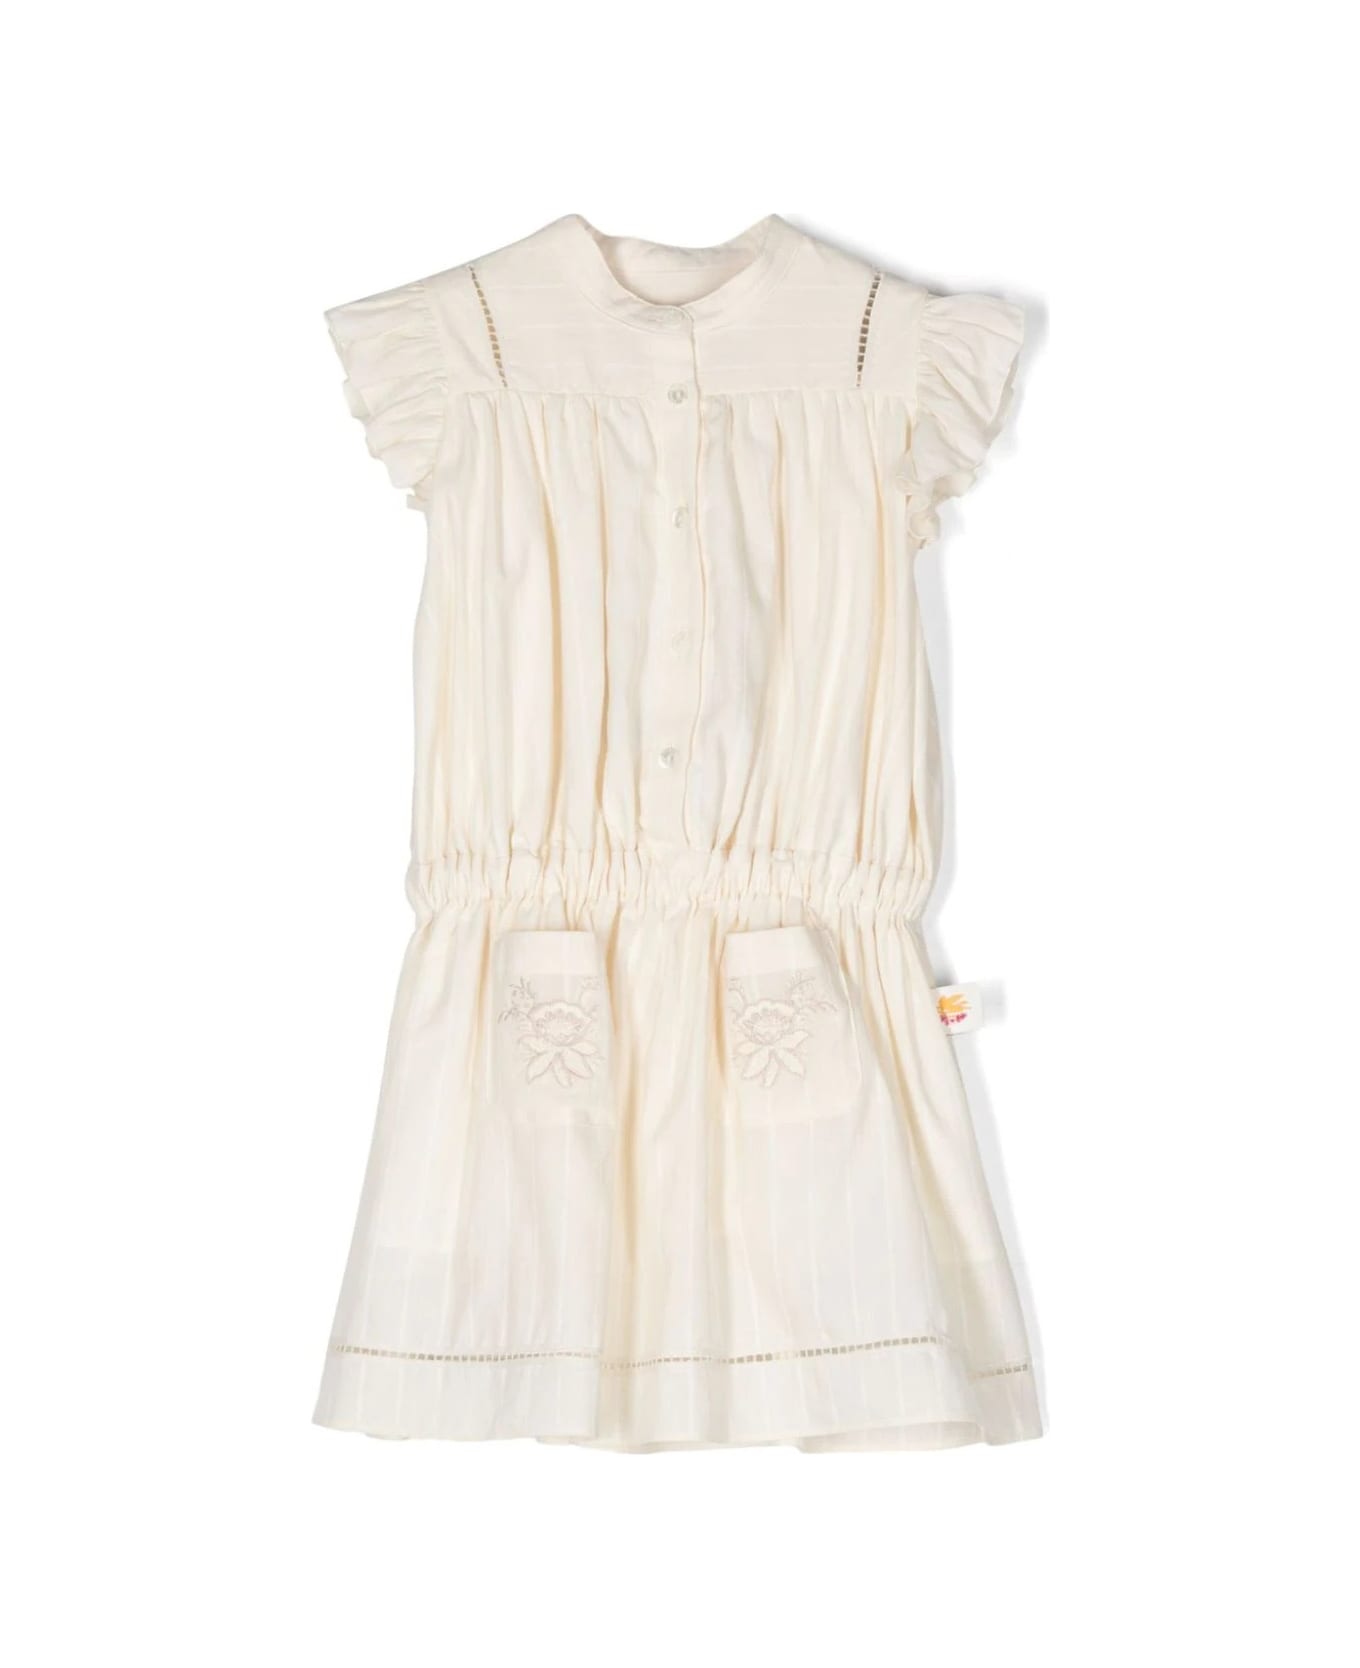 Etro Beige Pinstripe Dress With Ruffles And Embroidery - Brown